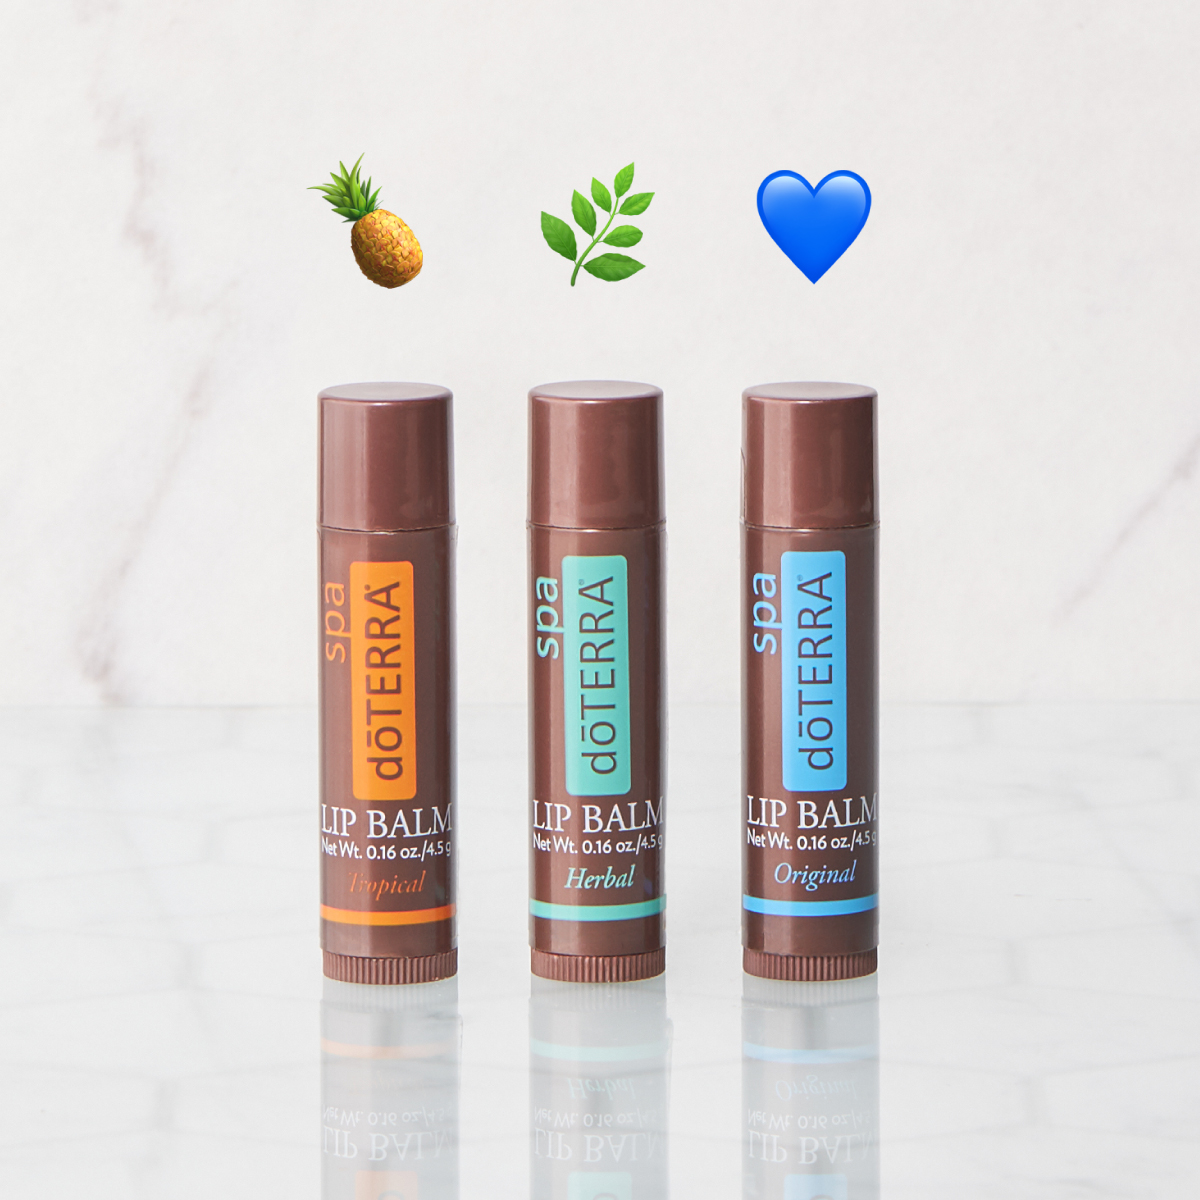 Which lip balm is your favorite? Tropical 🍍 Herbal 🌿 Original 💙